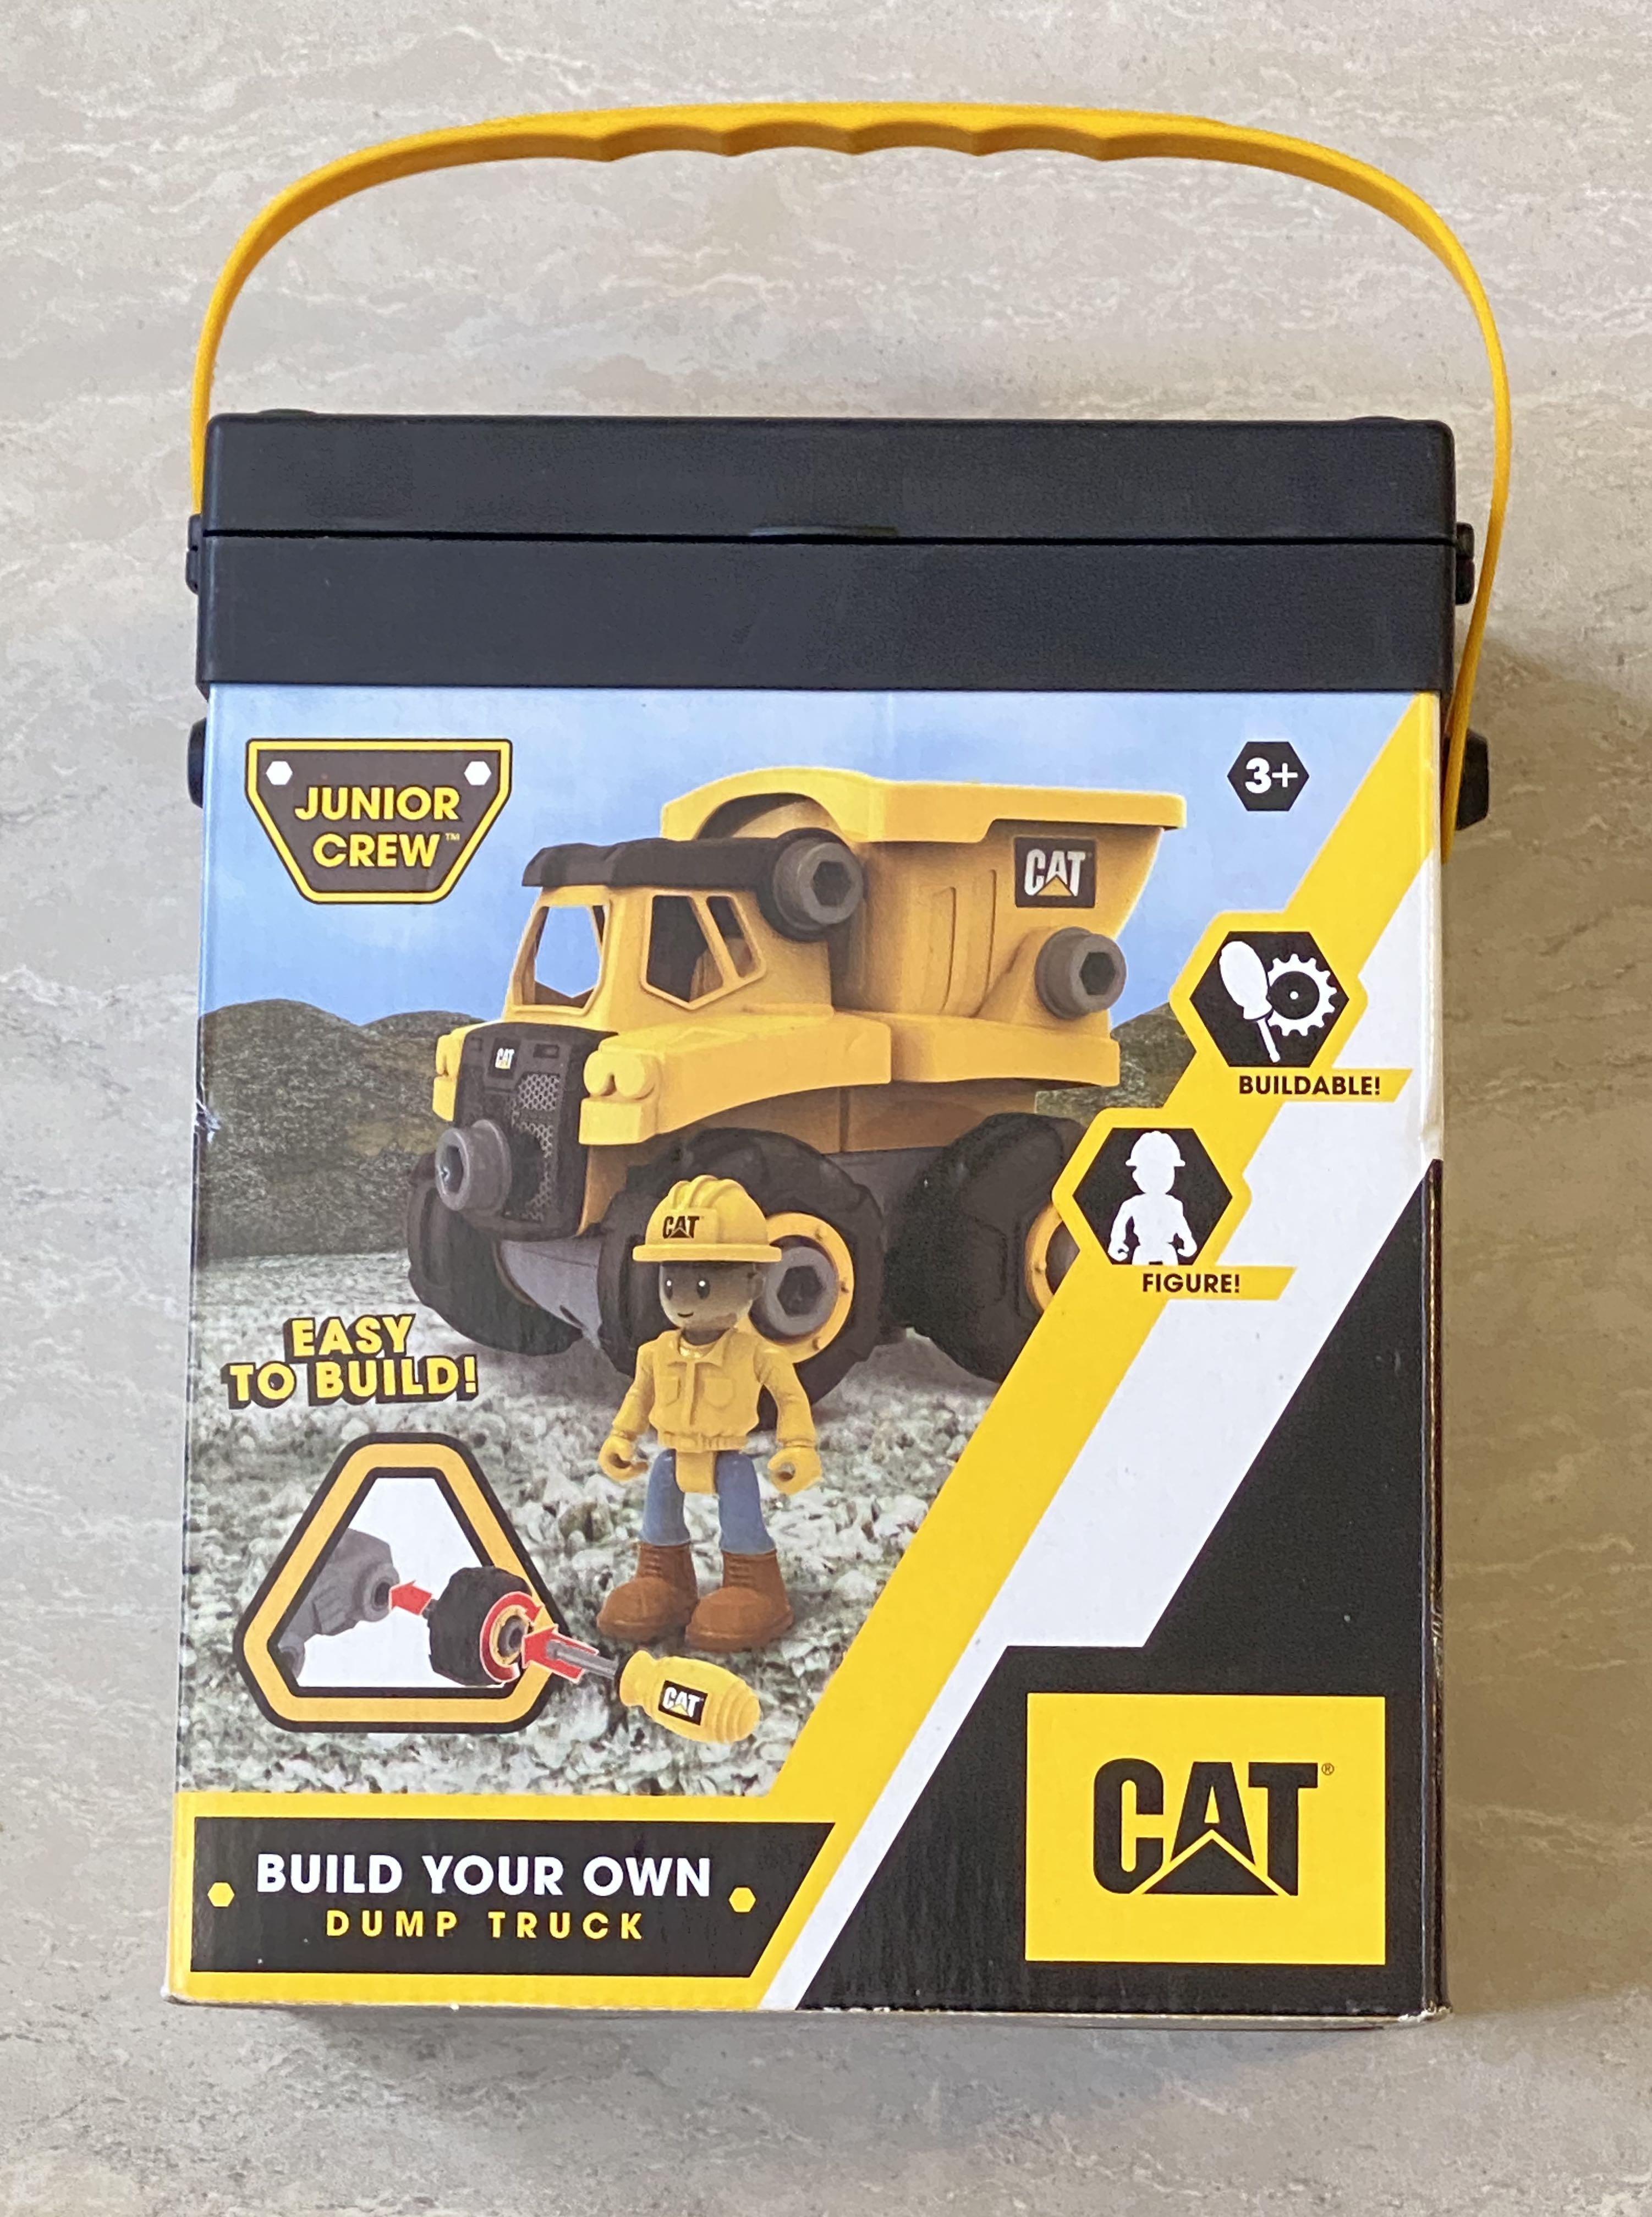 CAT toys - Build Your Own Dump Truck, 兒童＆孕婦用品, 嬰兒玩具